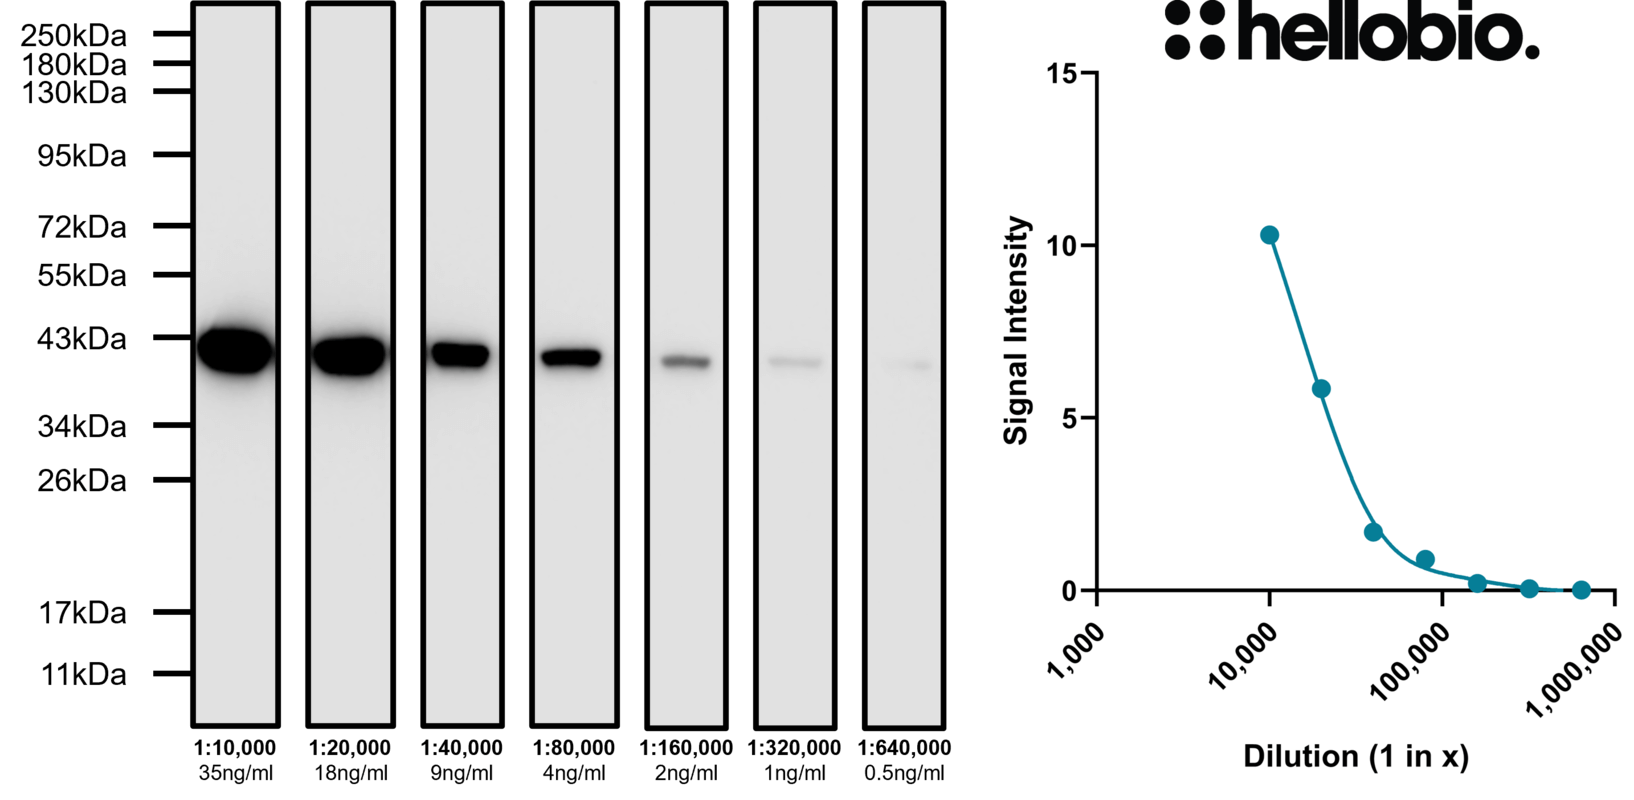 Figure 1. Concentration response of HB8356 staining when using an anti-GAPDH (HB9177) primary antibody.